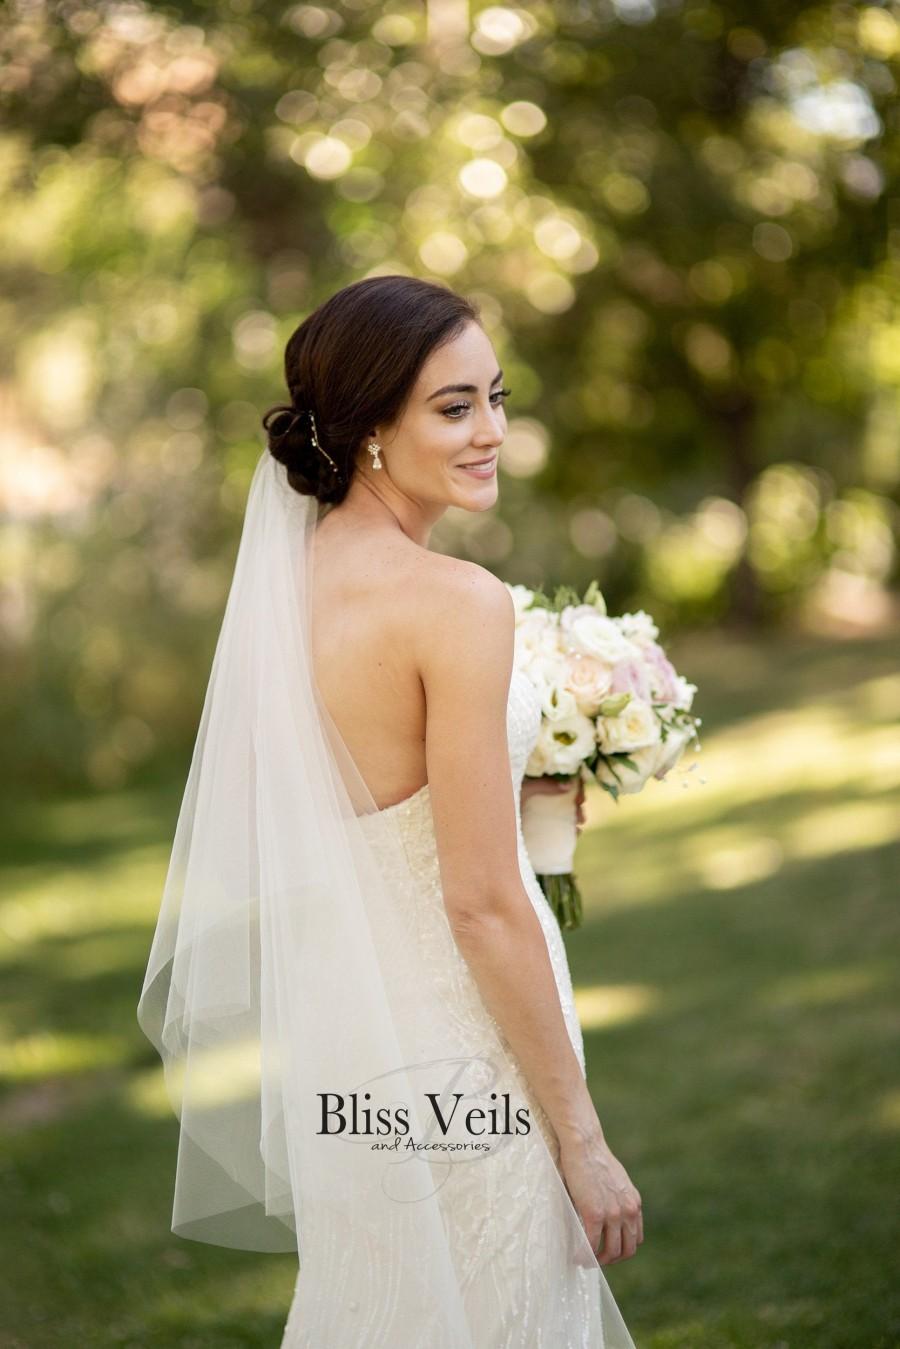 Wedding - Gorgeous 2 Tier Plain Edge Drop Veil - Veil with Blusher - Available in 9 Lengths & 10 Colors, Fast Shipping!